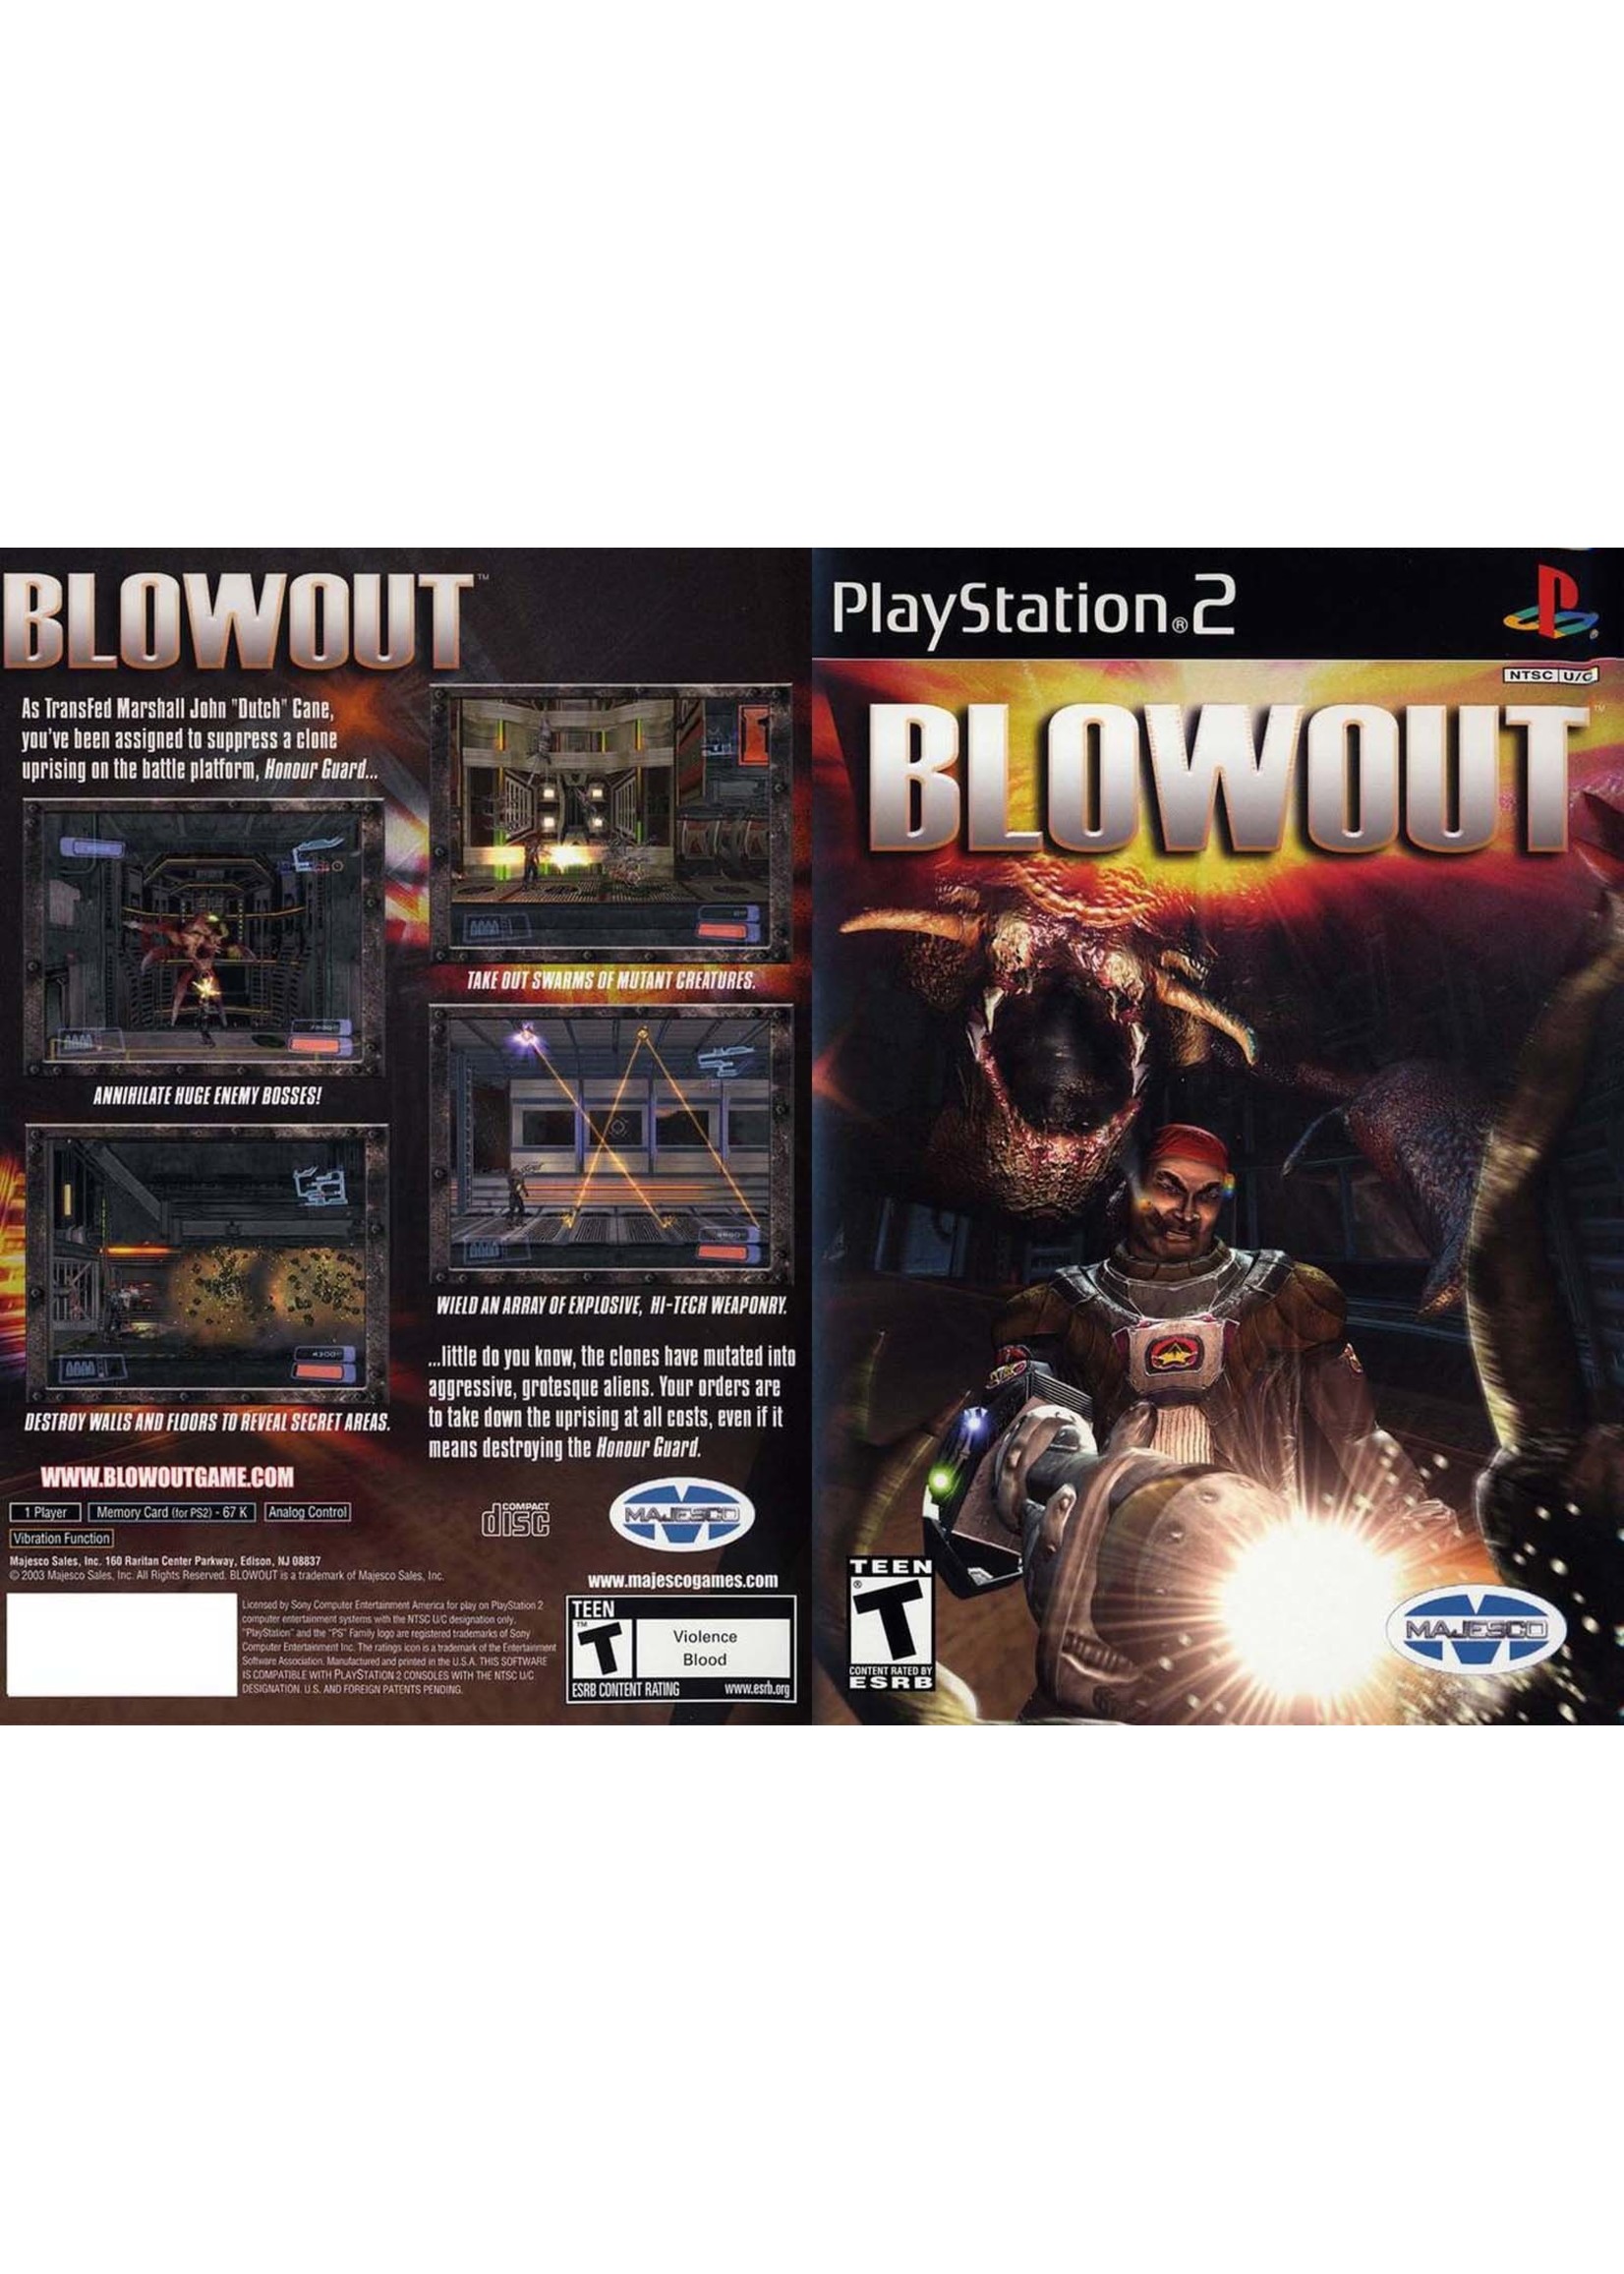 Sony Playstation 2 (PS2) Blowout